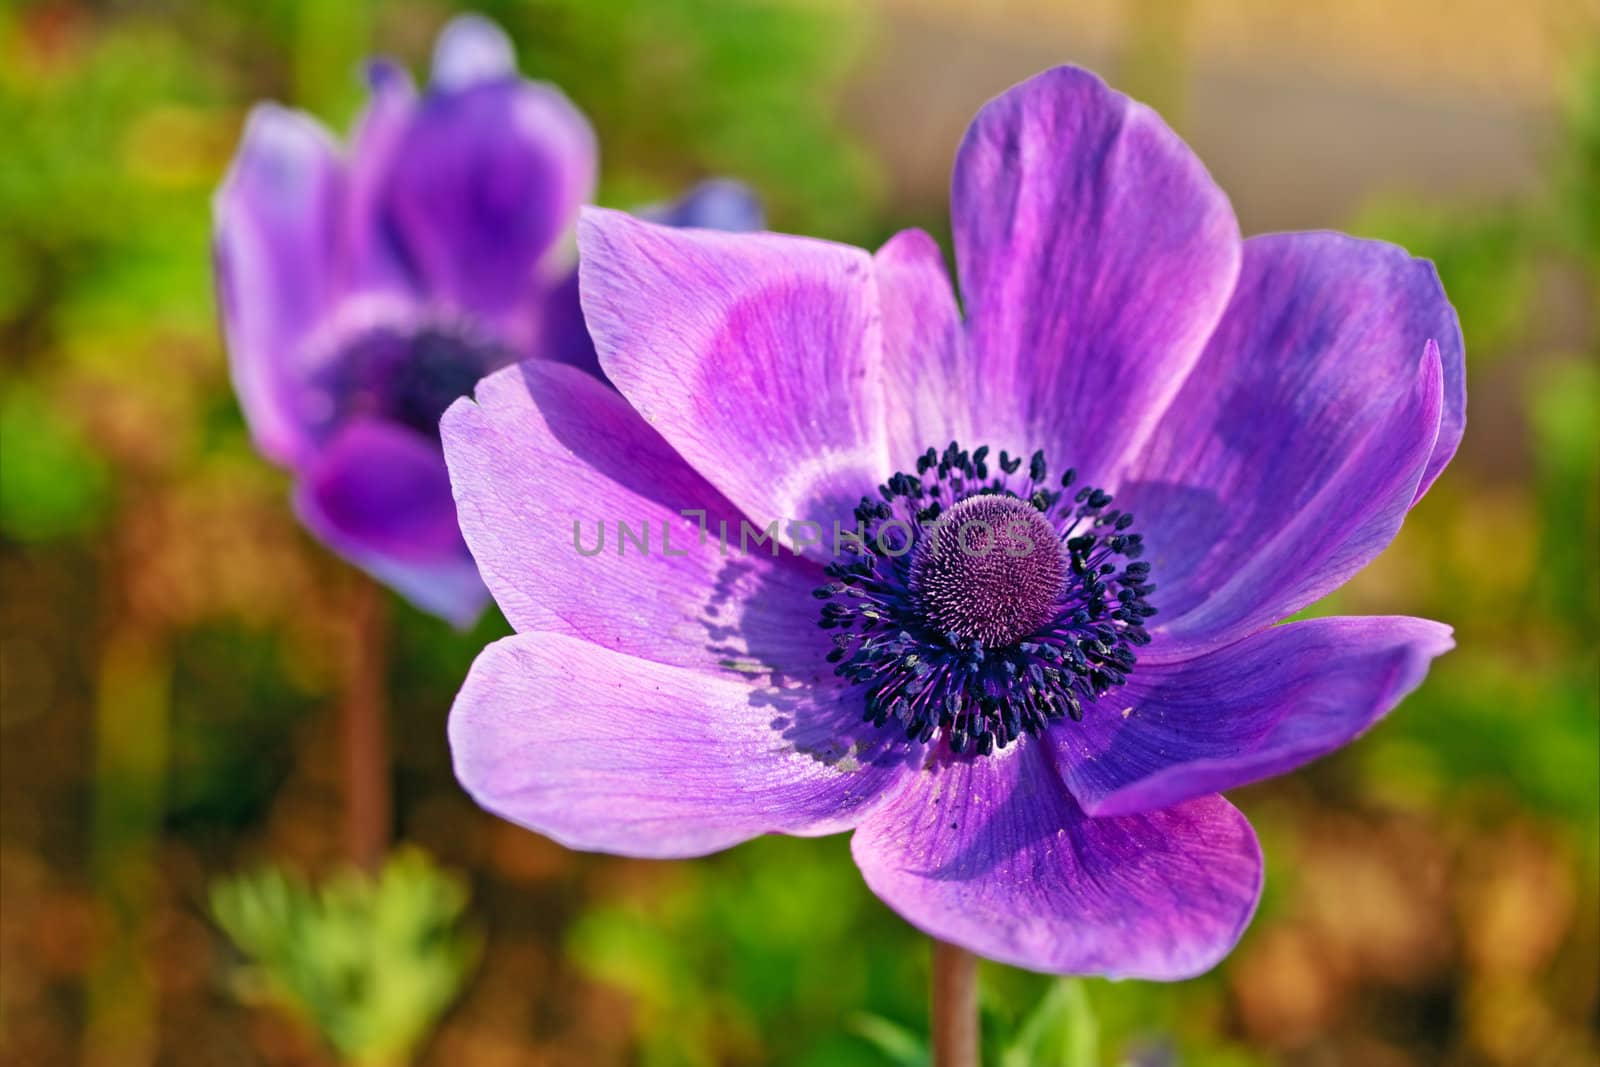 Close-up of a single beautiful anemone flower on blurry background